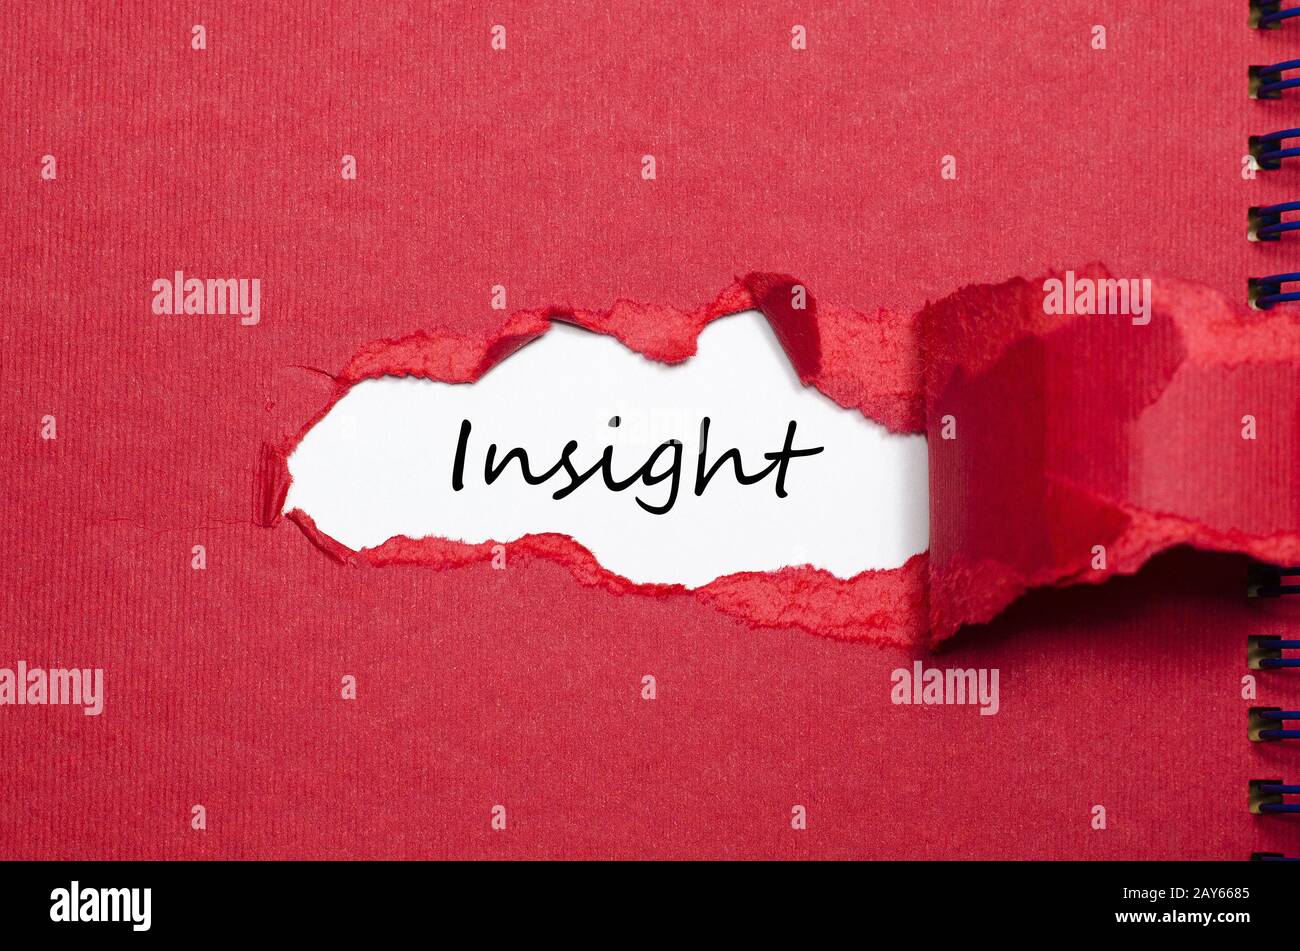 The word insight appearing behind torn paper Stock Photo